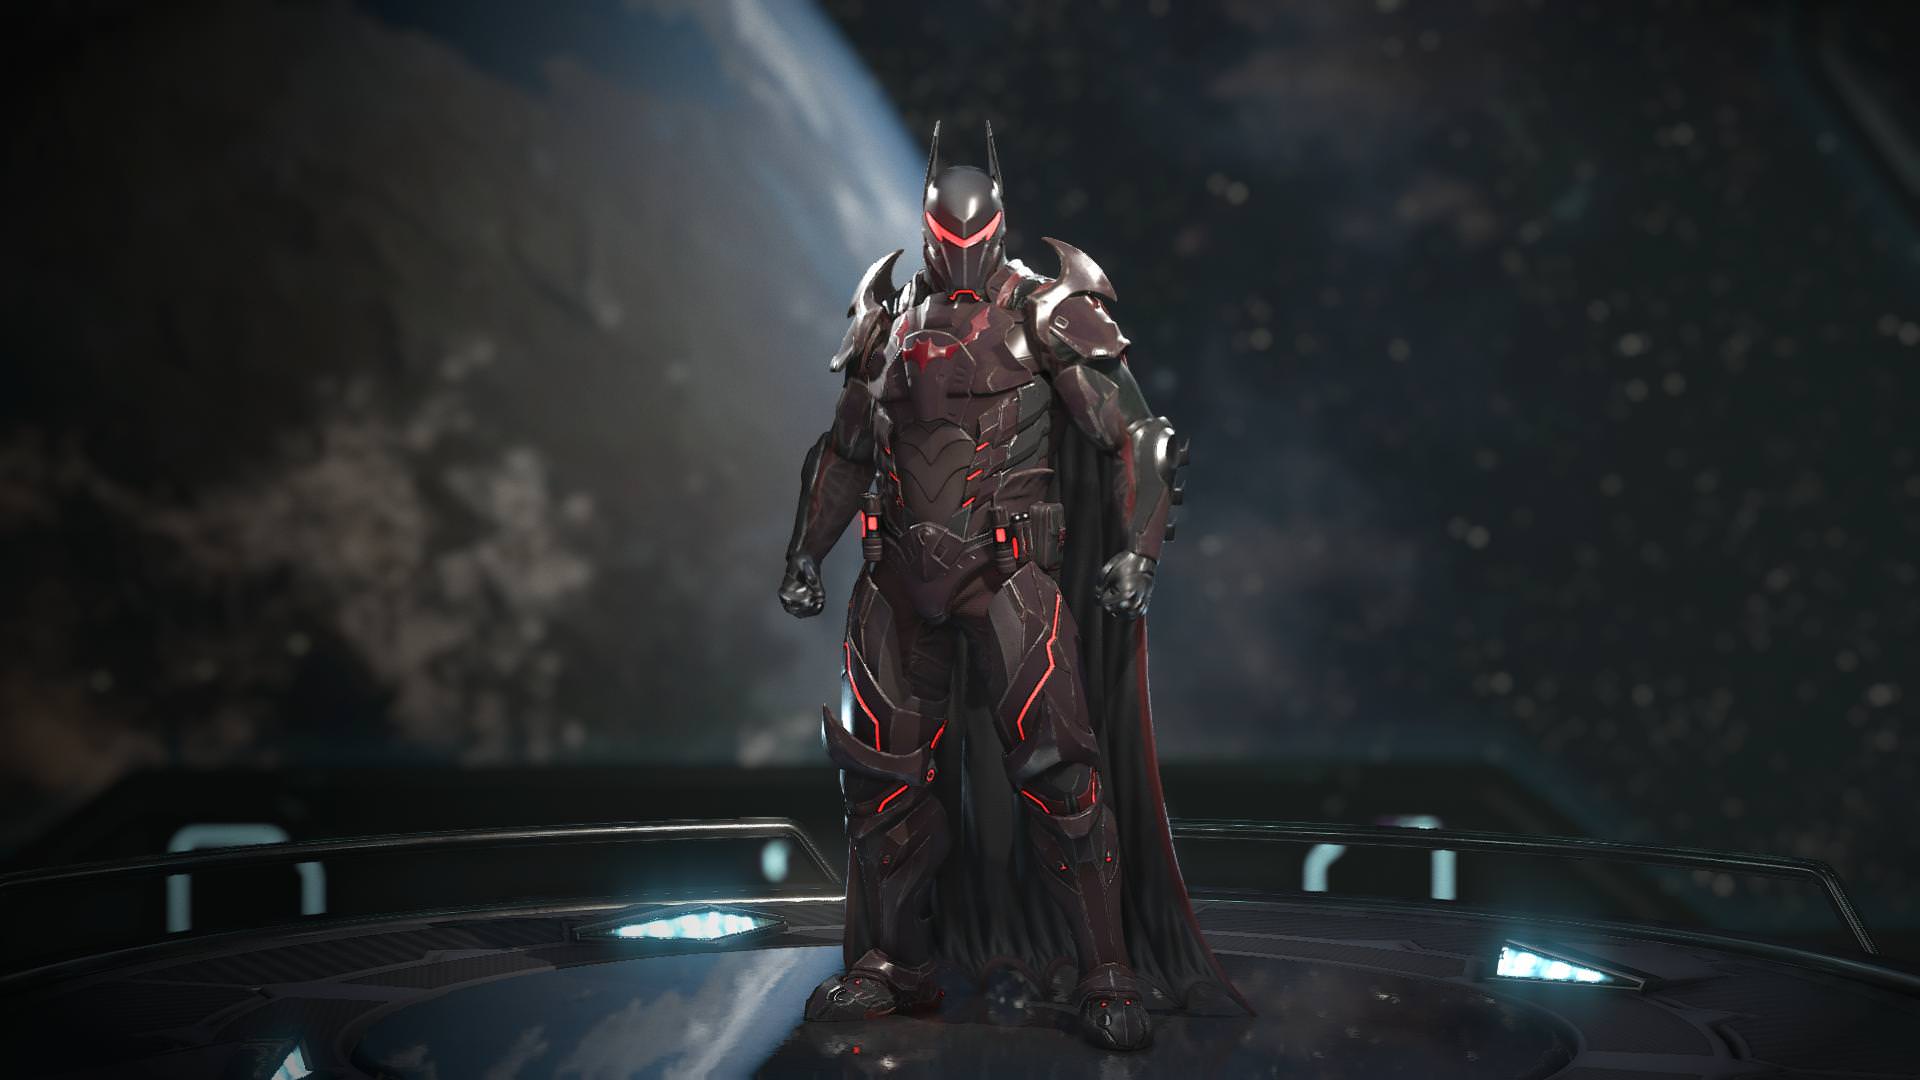 Injustice 2 lets you make some fricken awesome versions of Batman